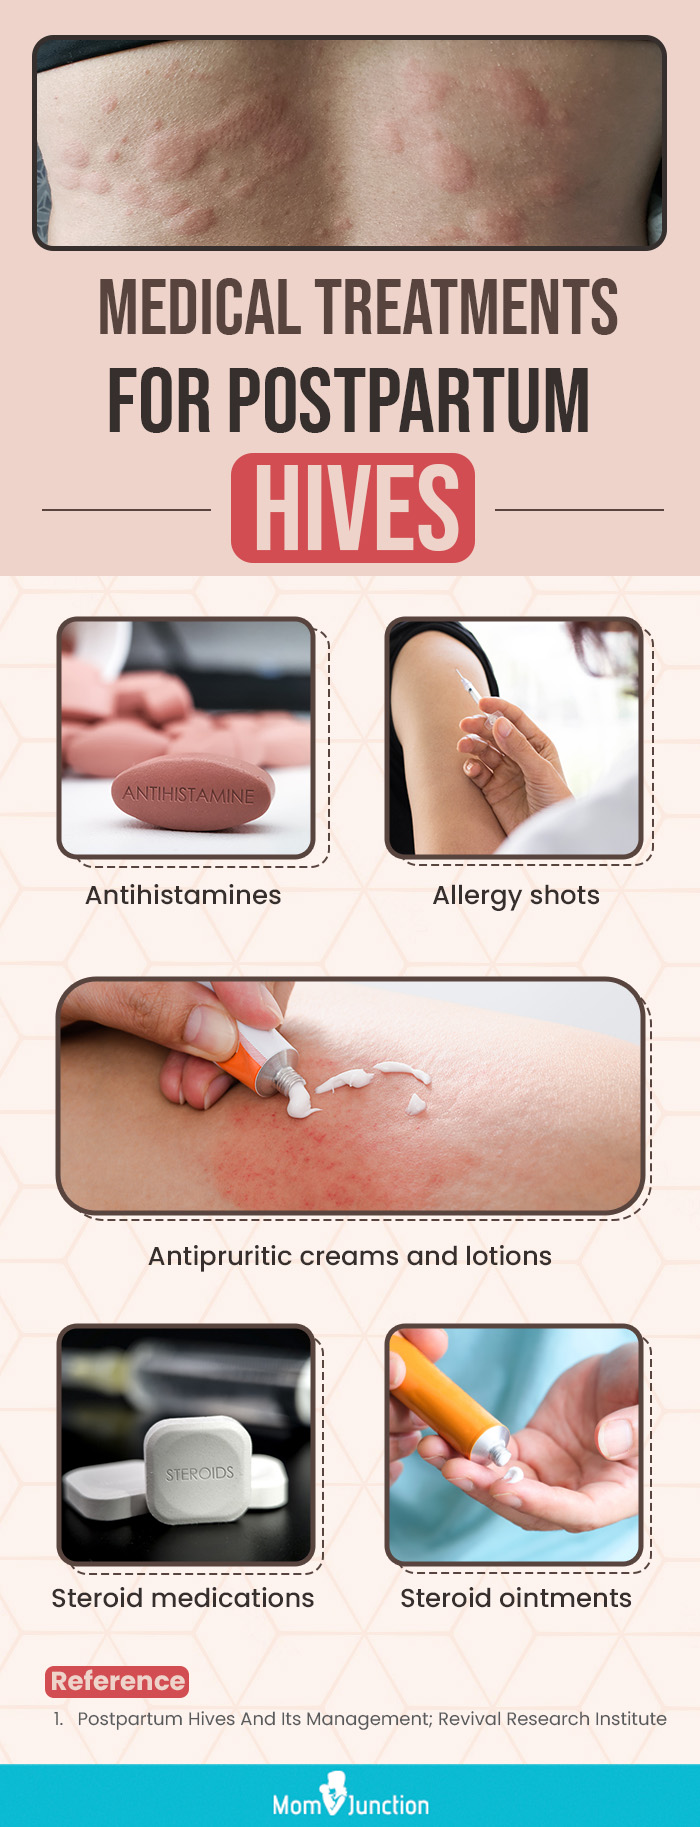 medical treatments for postpating hives (infographic)